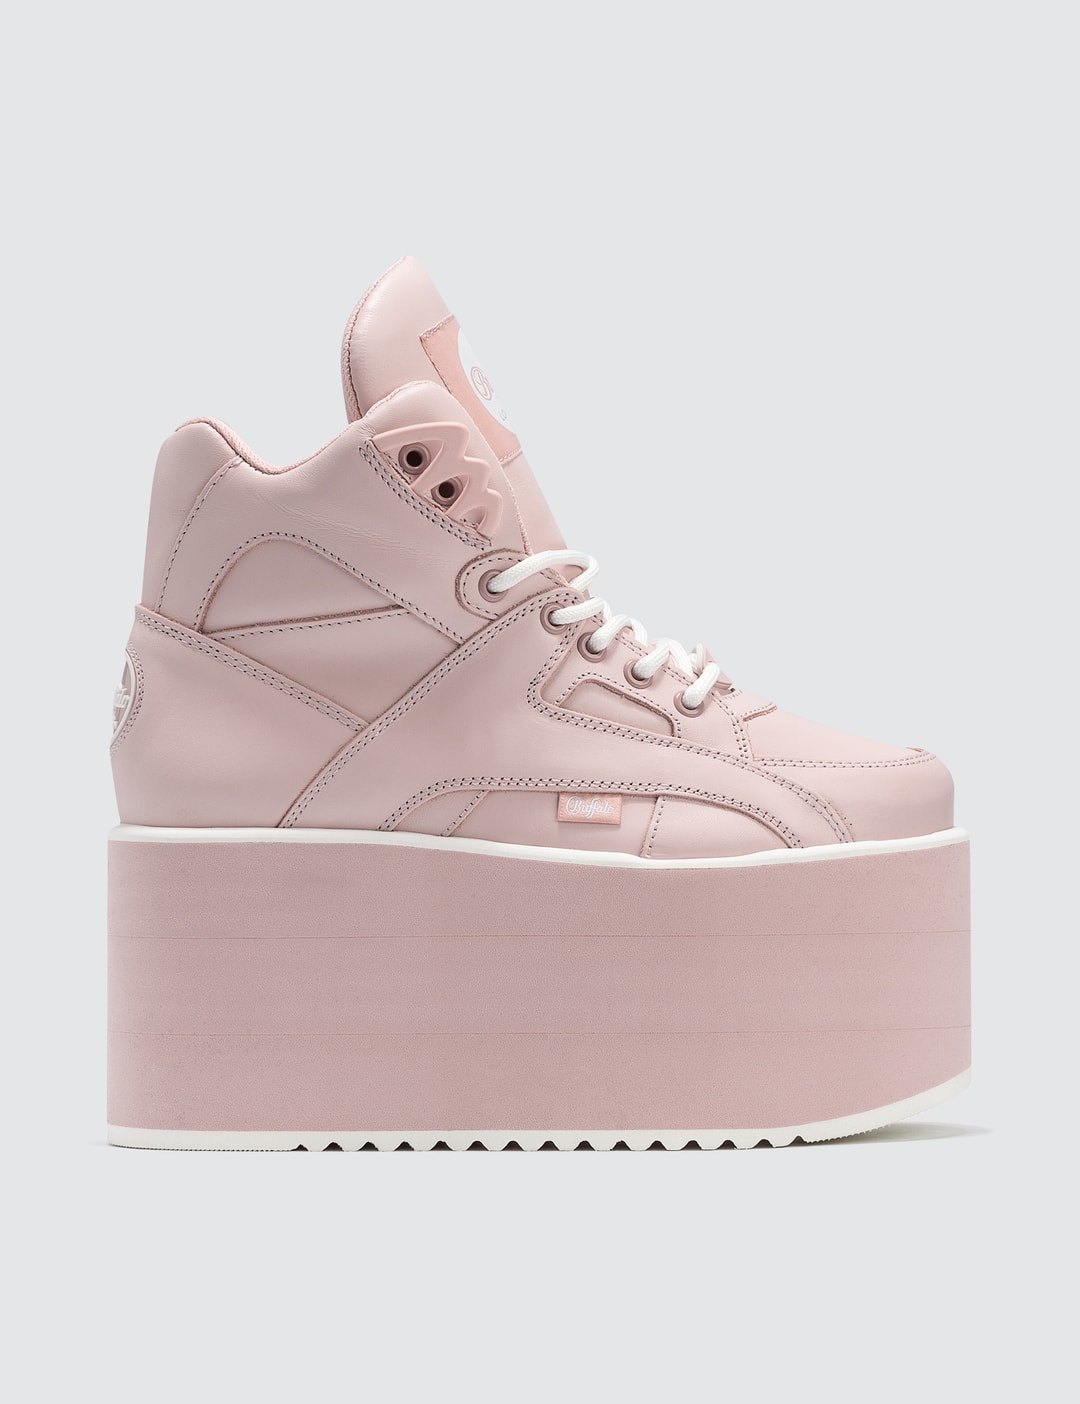 Buffalo London - Buffalo Baby Pink High Tower Sneakers | HBX - Globally Curated Fashion by Hypebeast